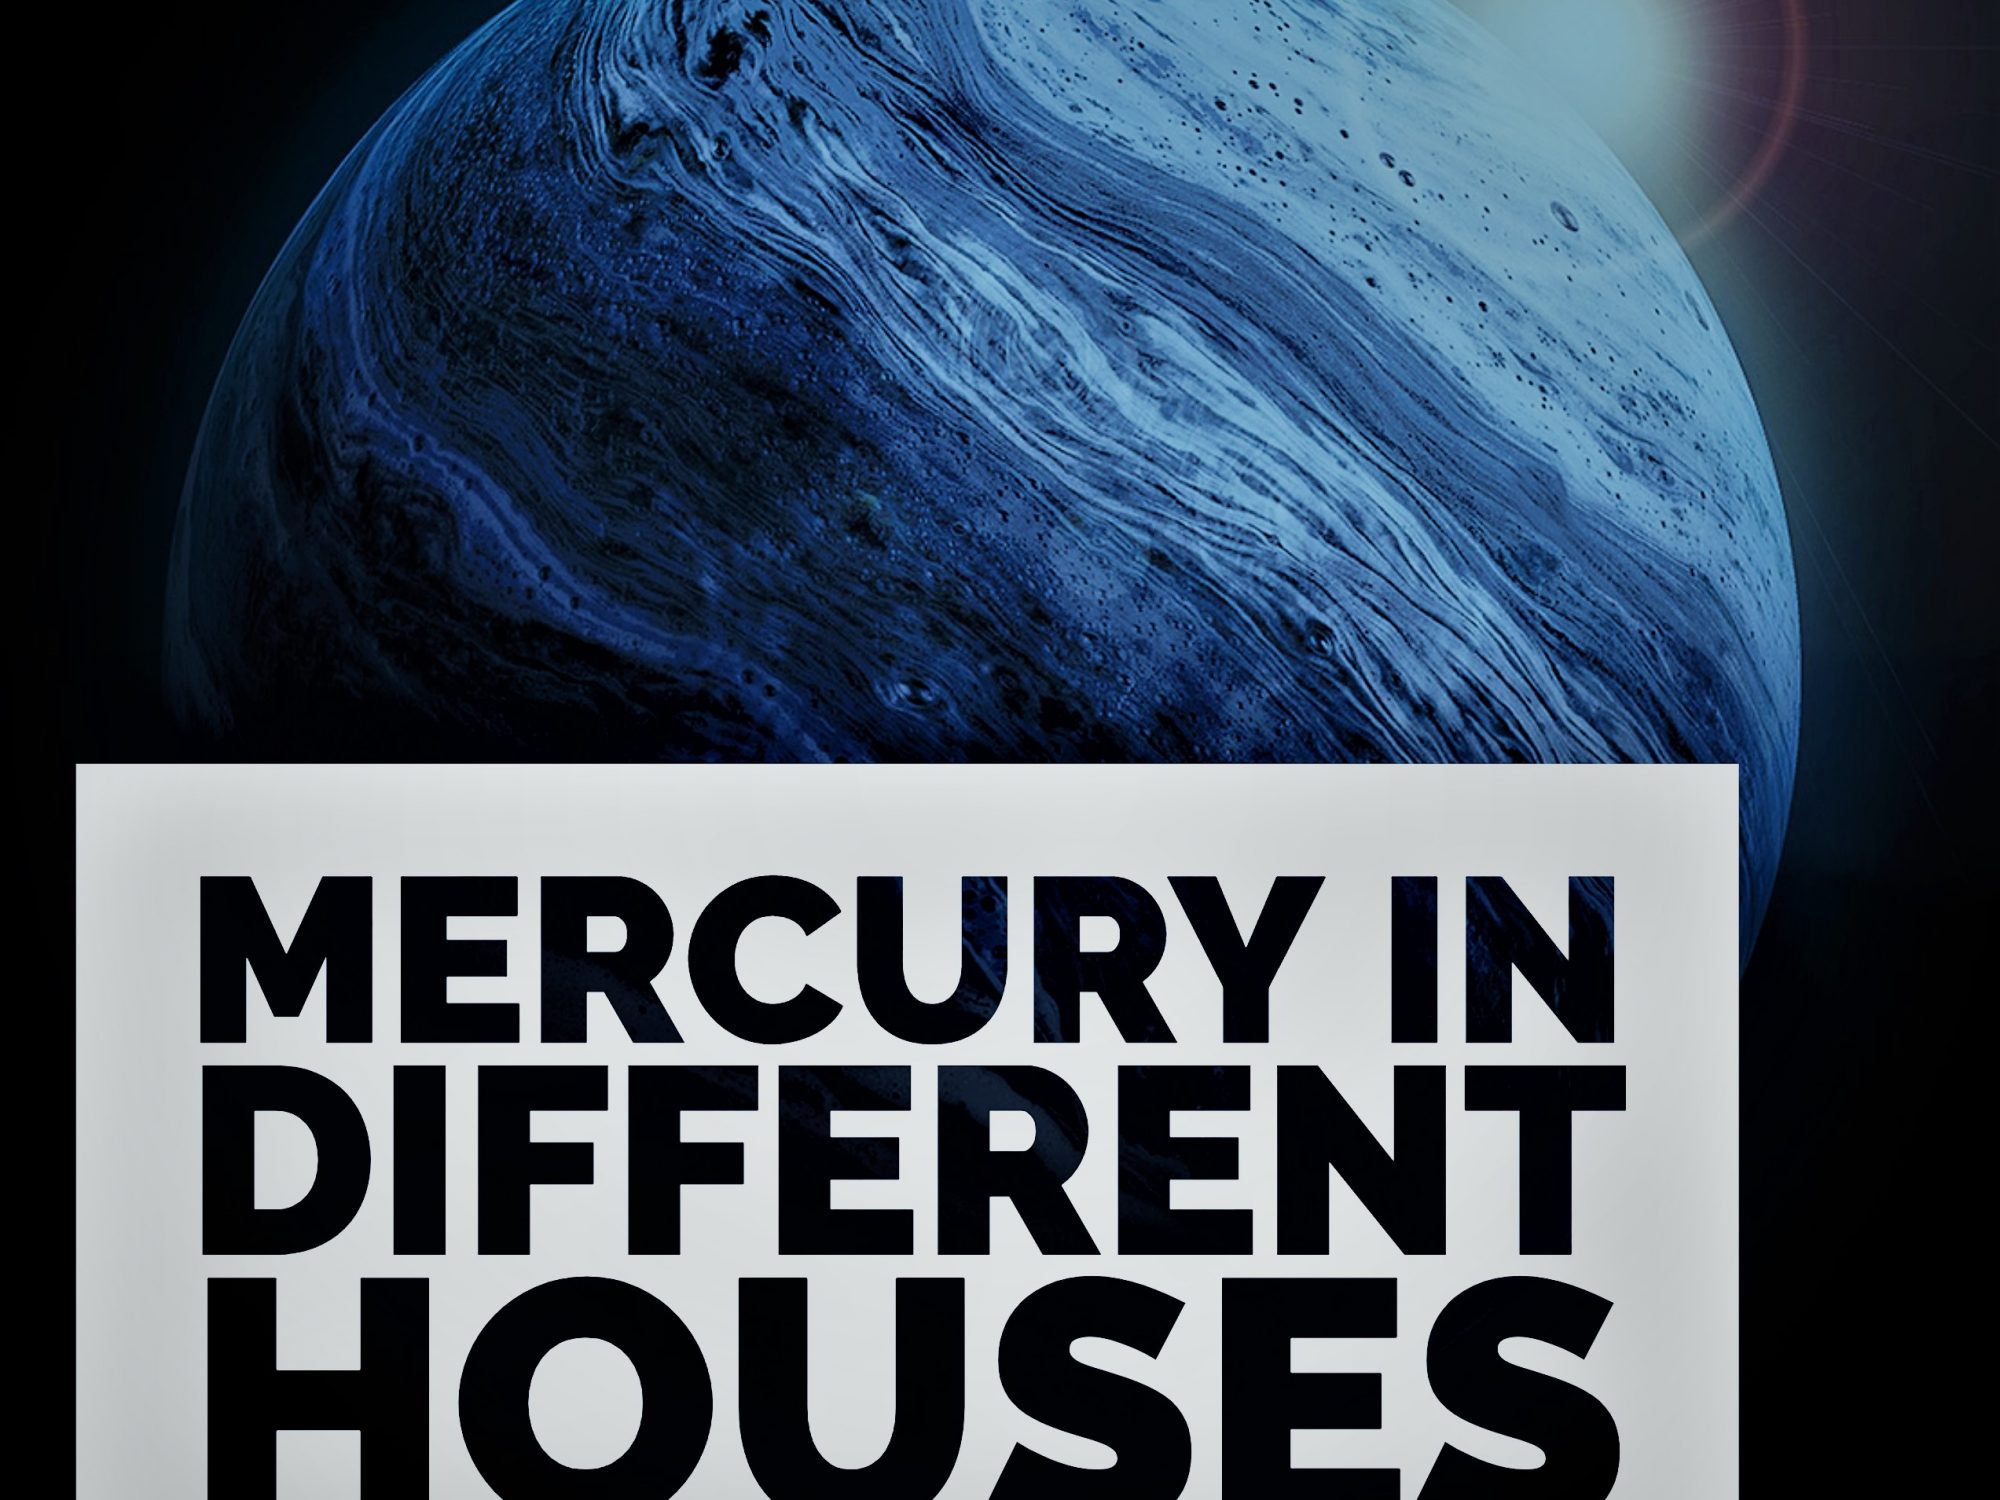 Mercury in Different Houses